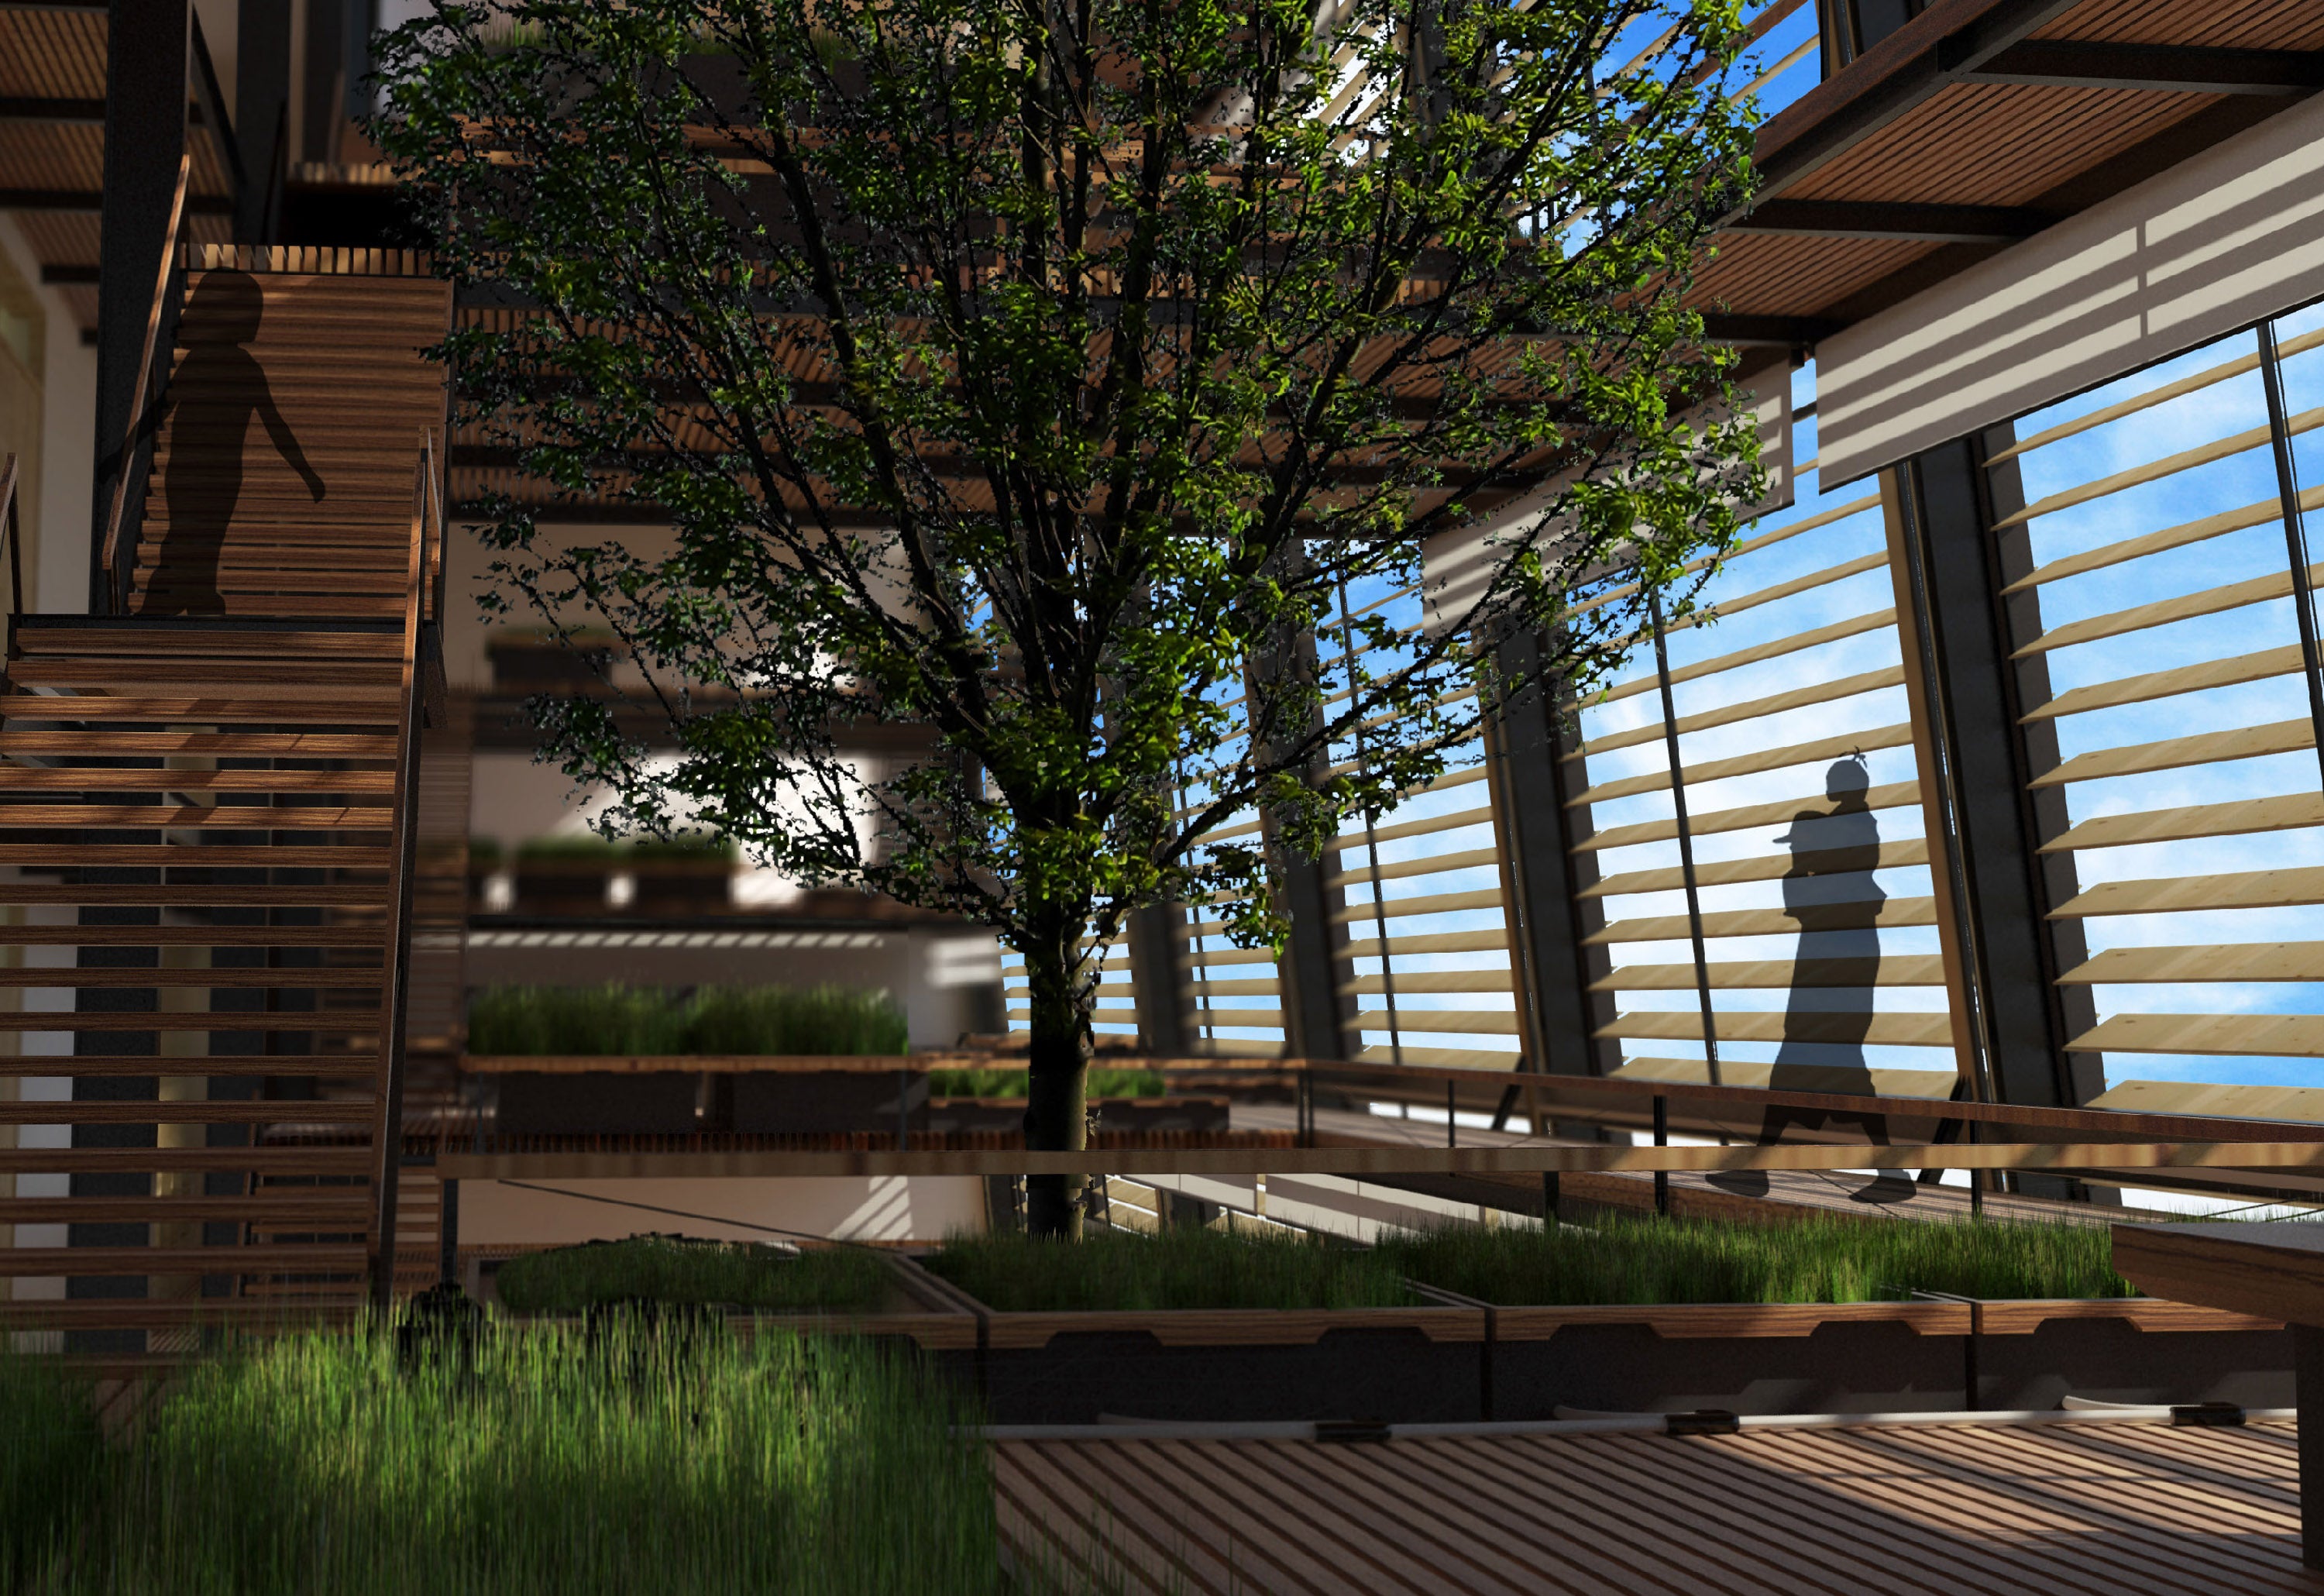 An interior rendering of the building's greenhouse atrium. There is a large tree in the middle of the empty space.